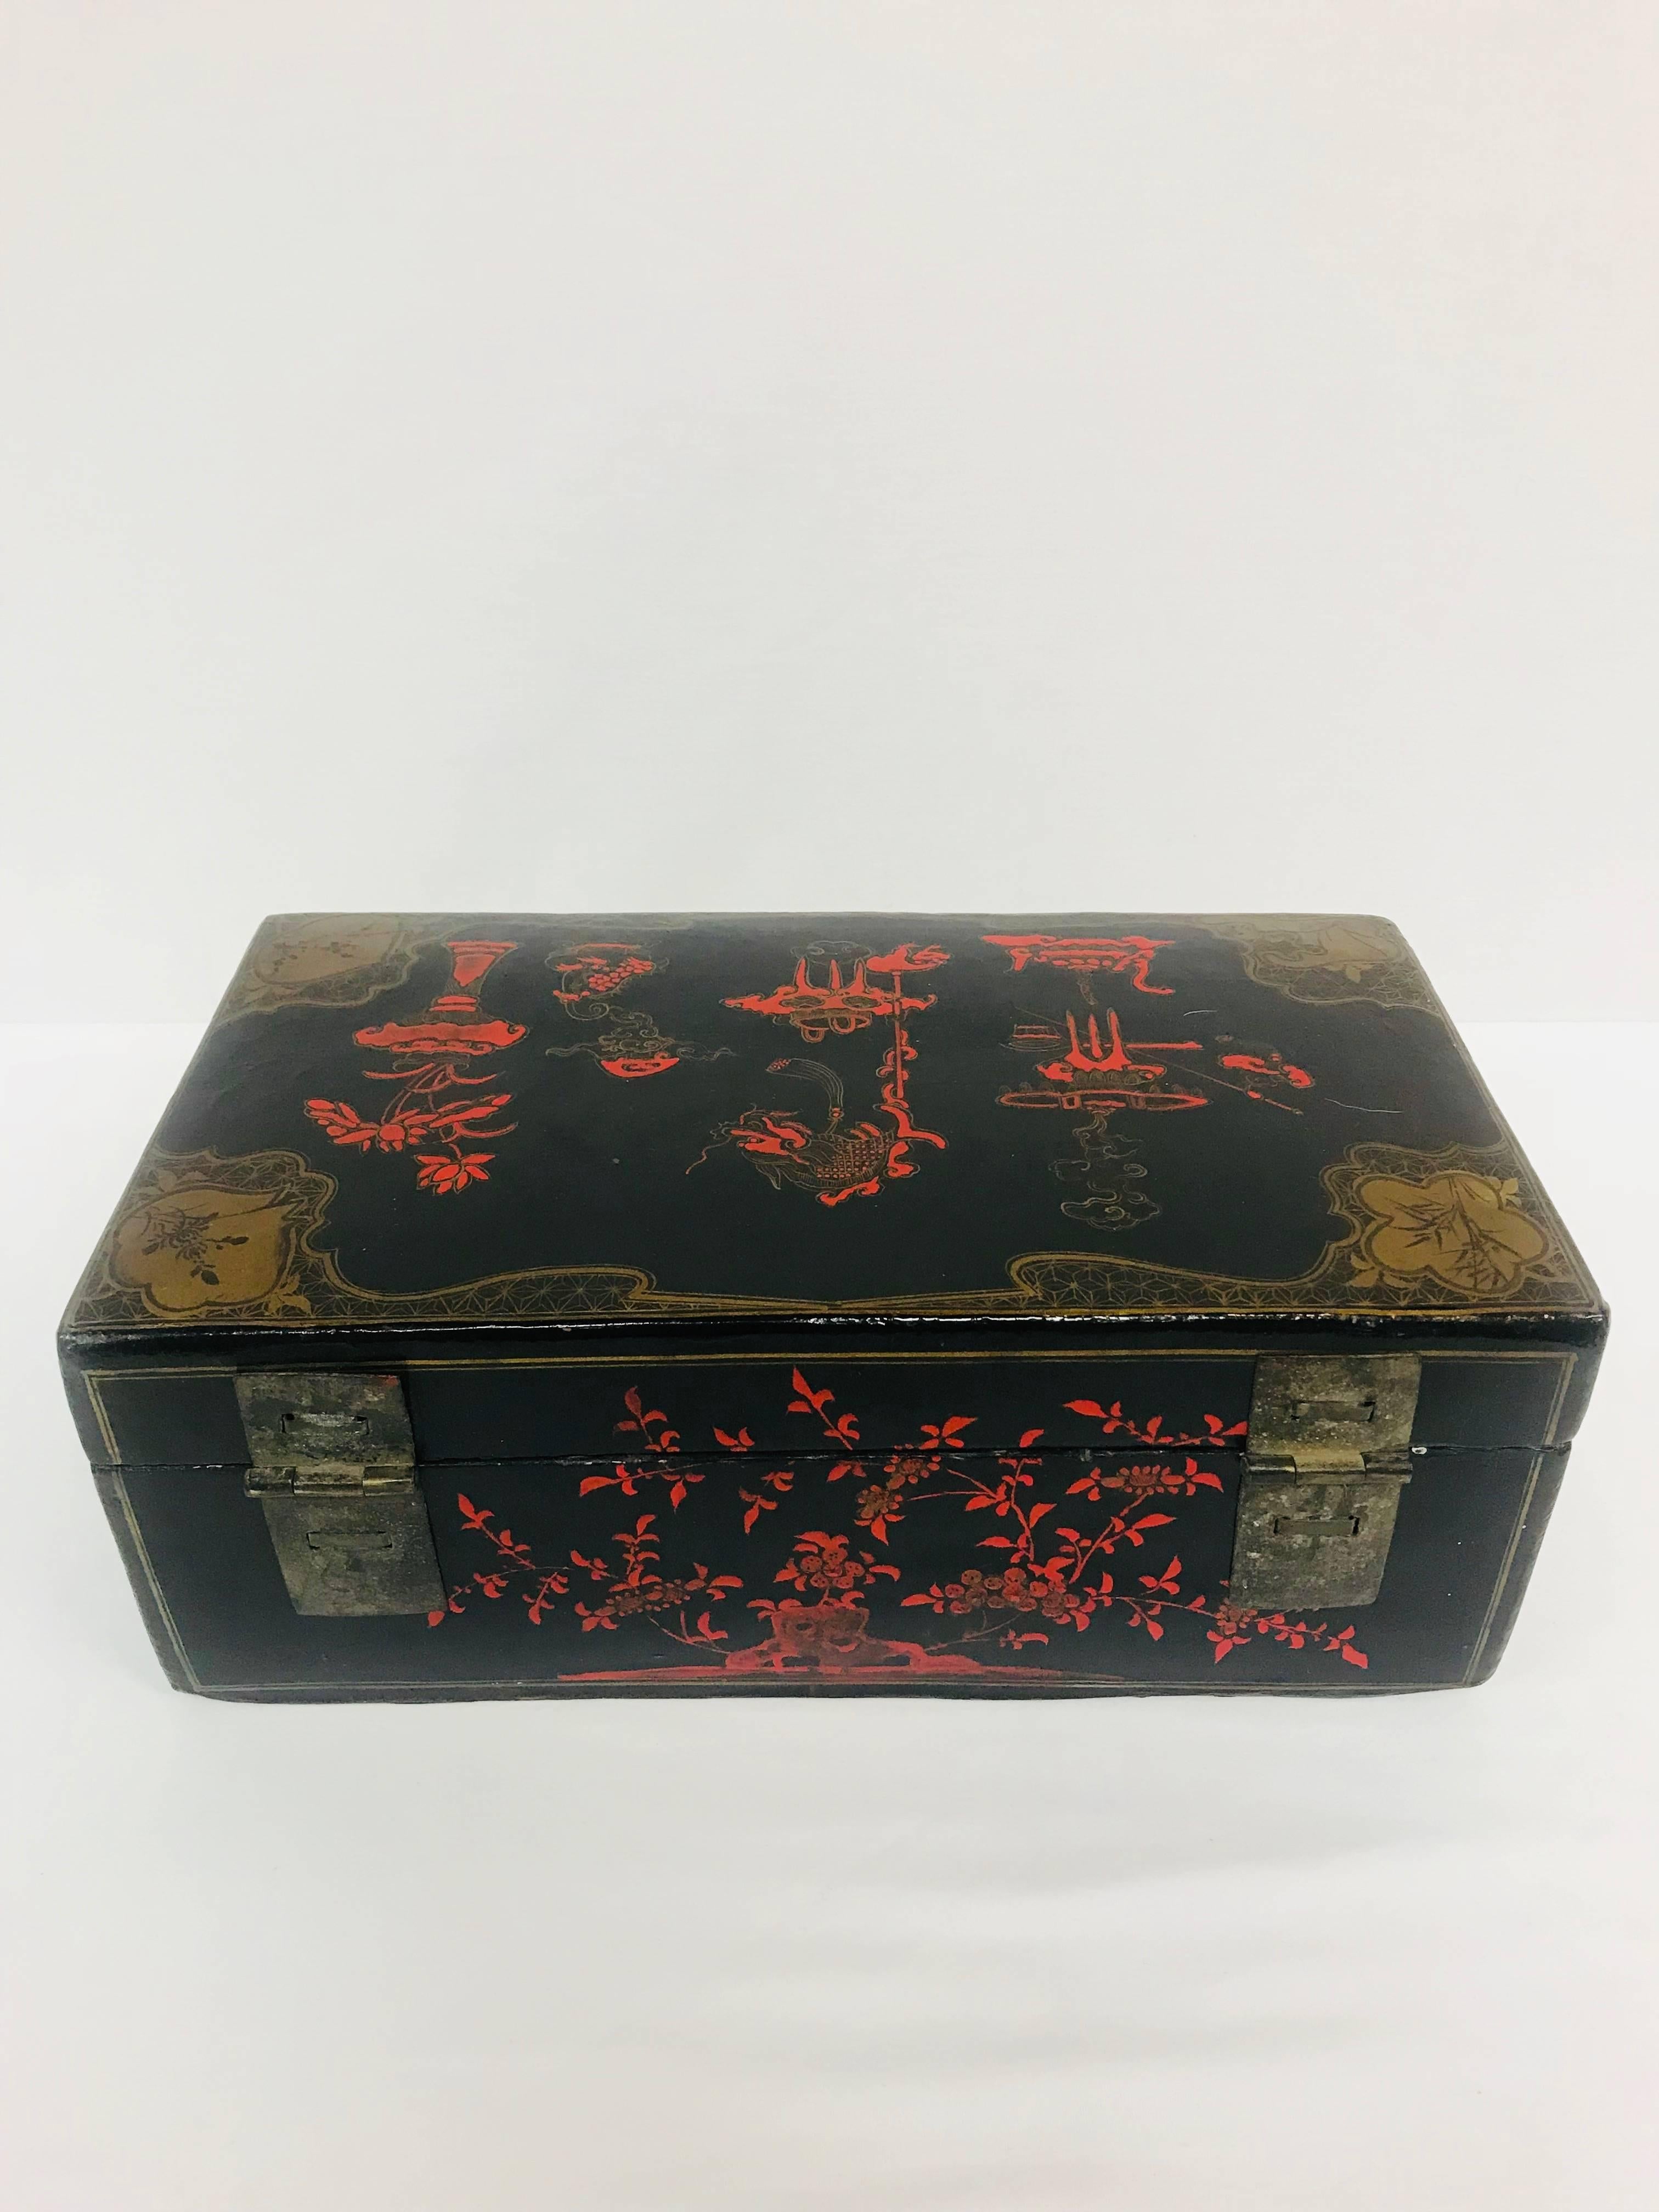 Black and Red Lacquer Asian Box In Good Condition For Sale In High Point, NC